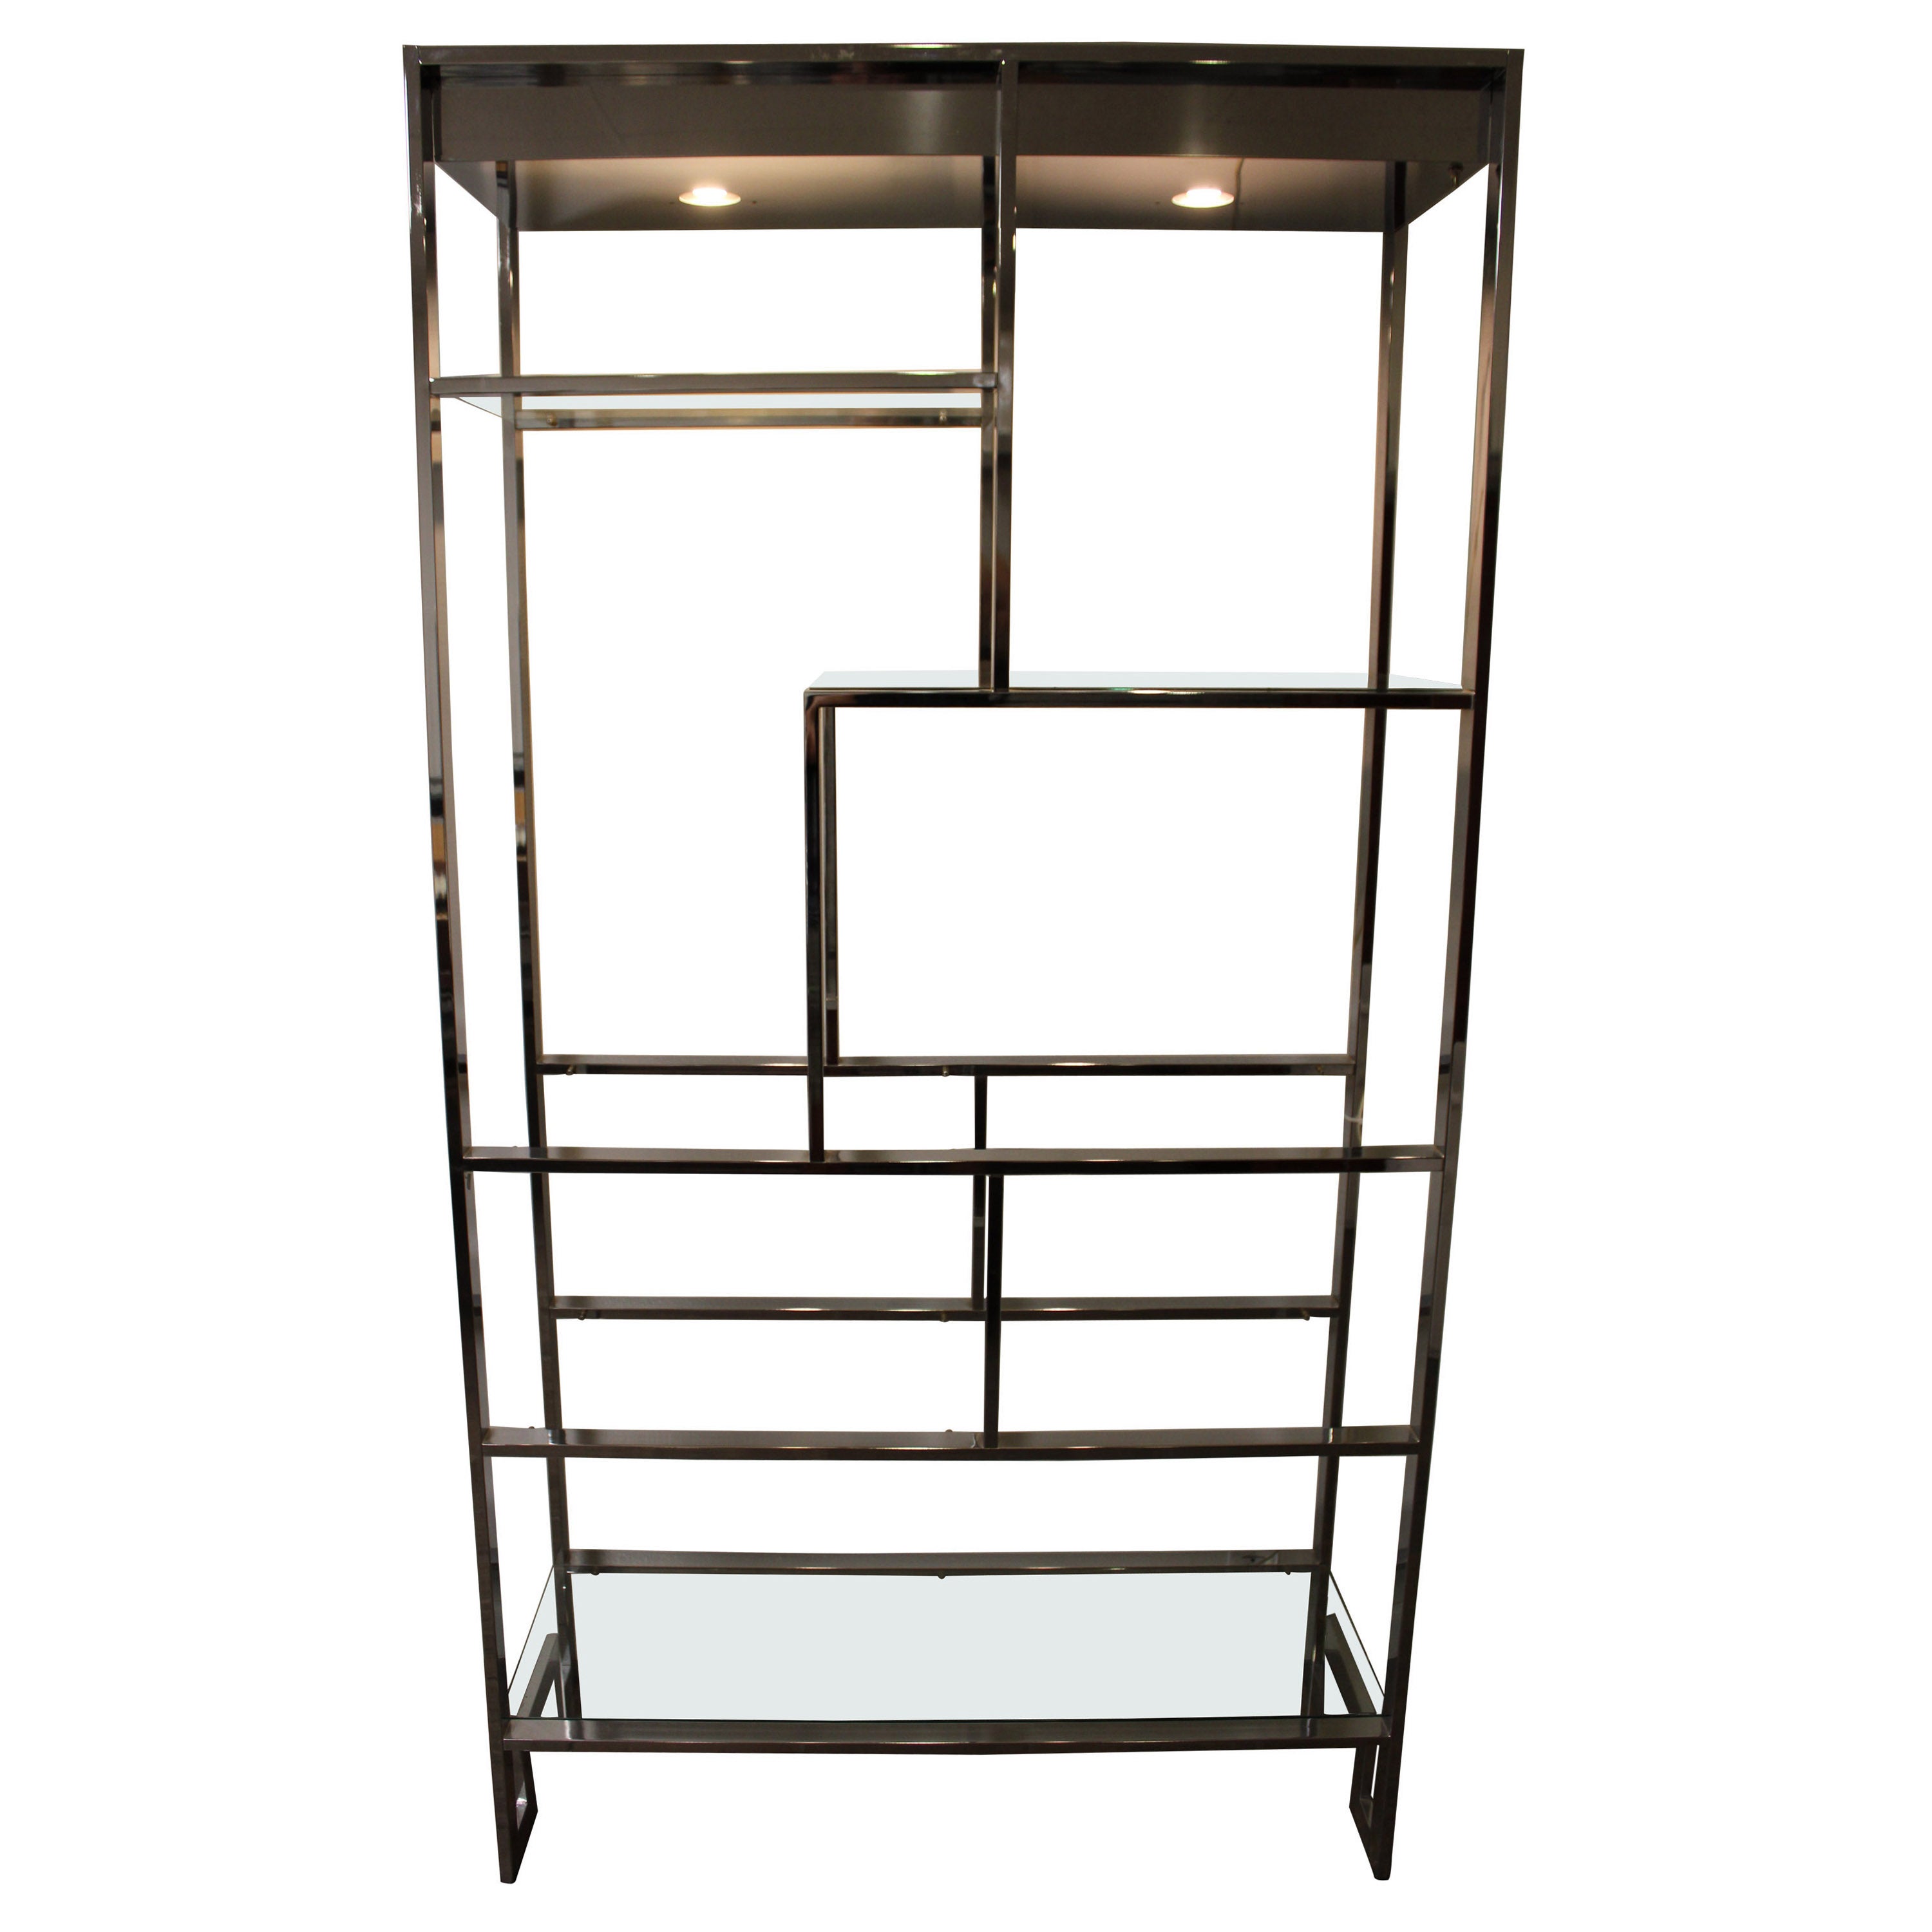 Design Institute of America (DIA) Chrome Plated Steel Etagere For Sale